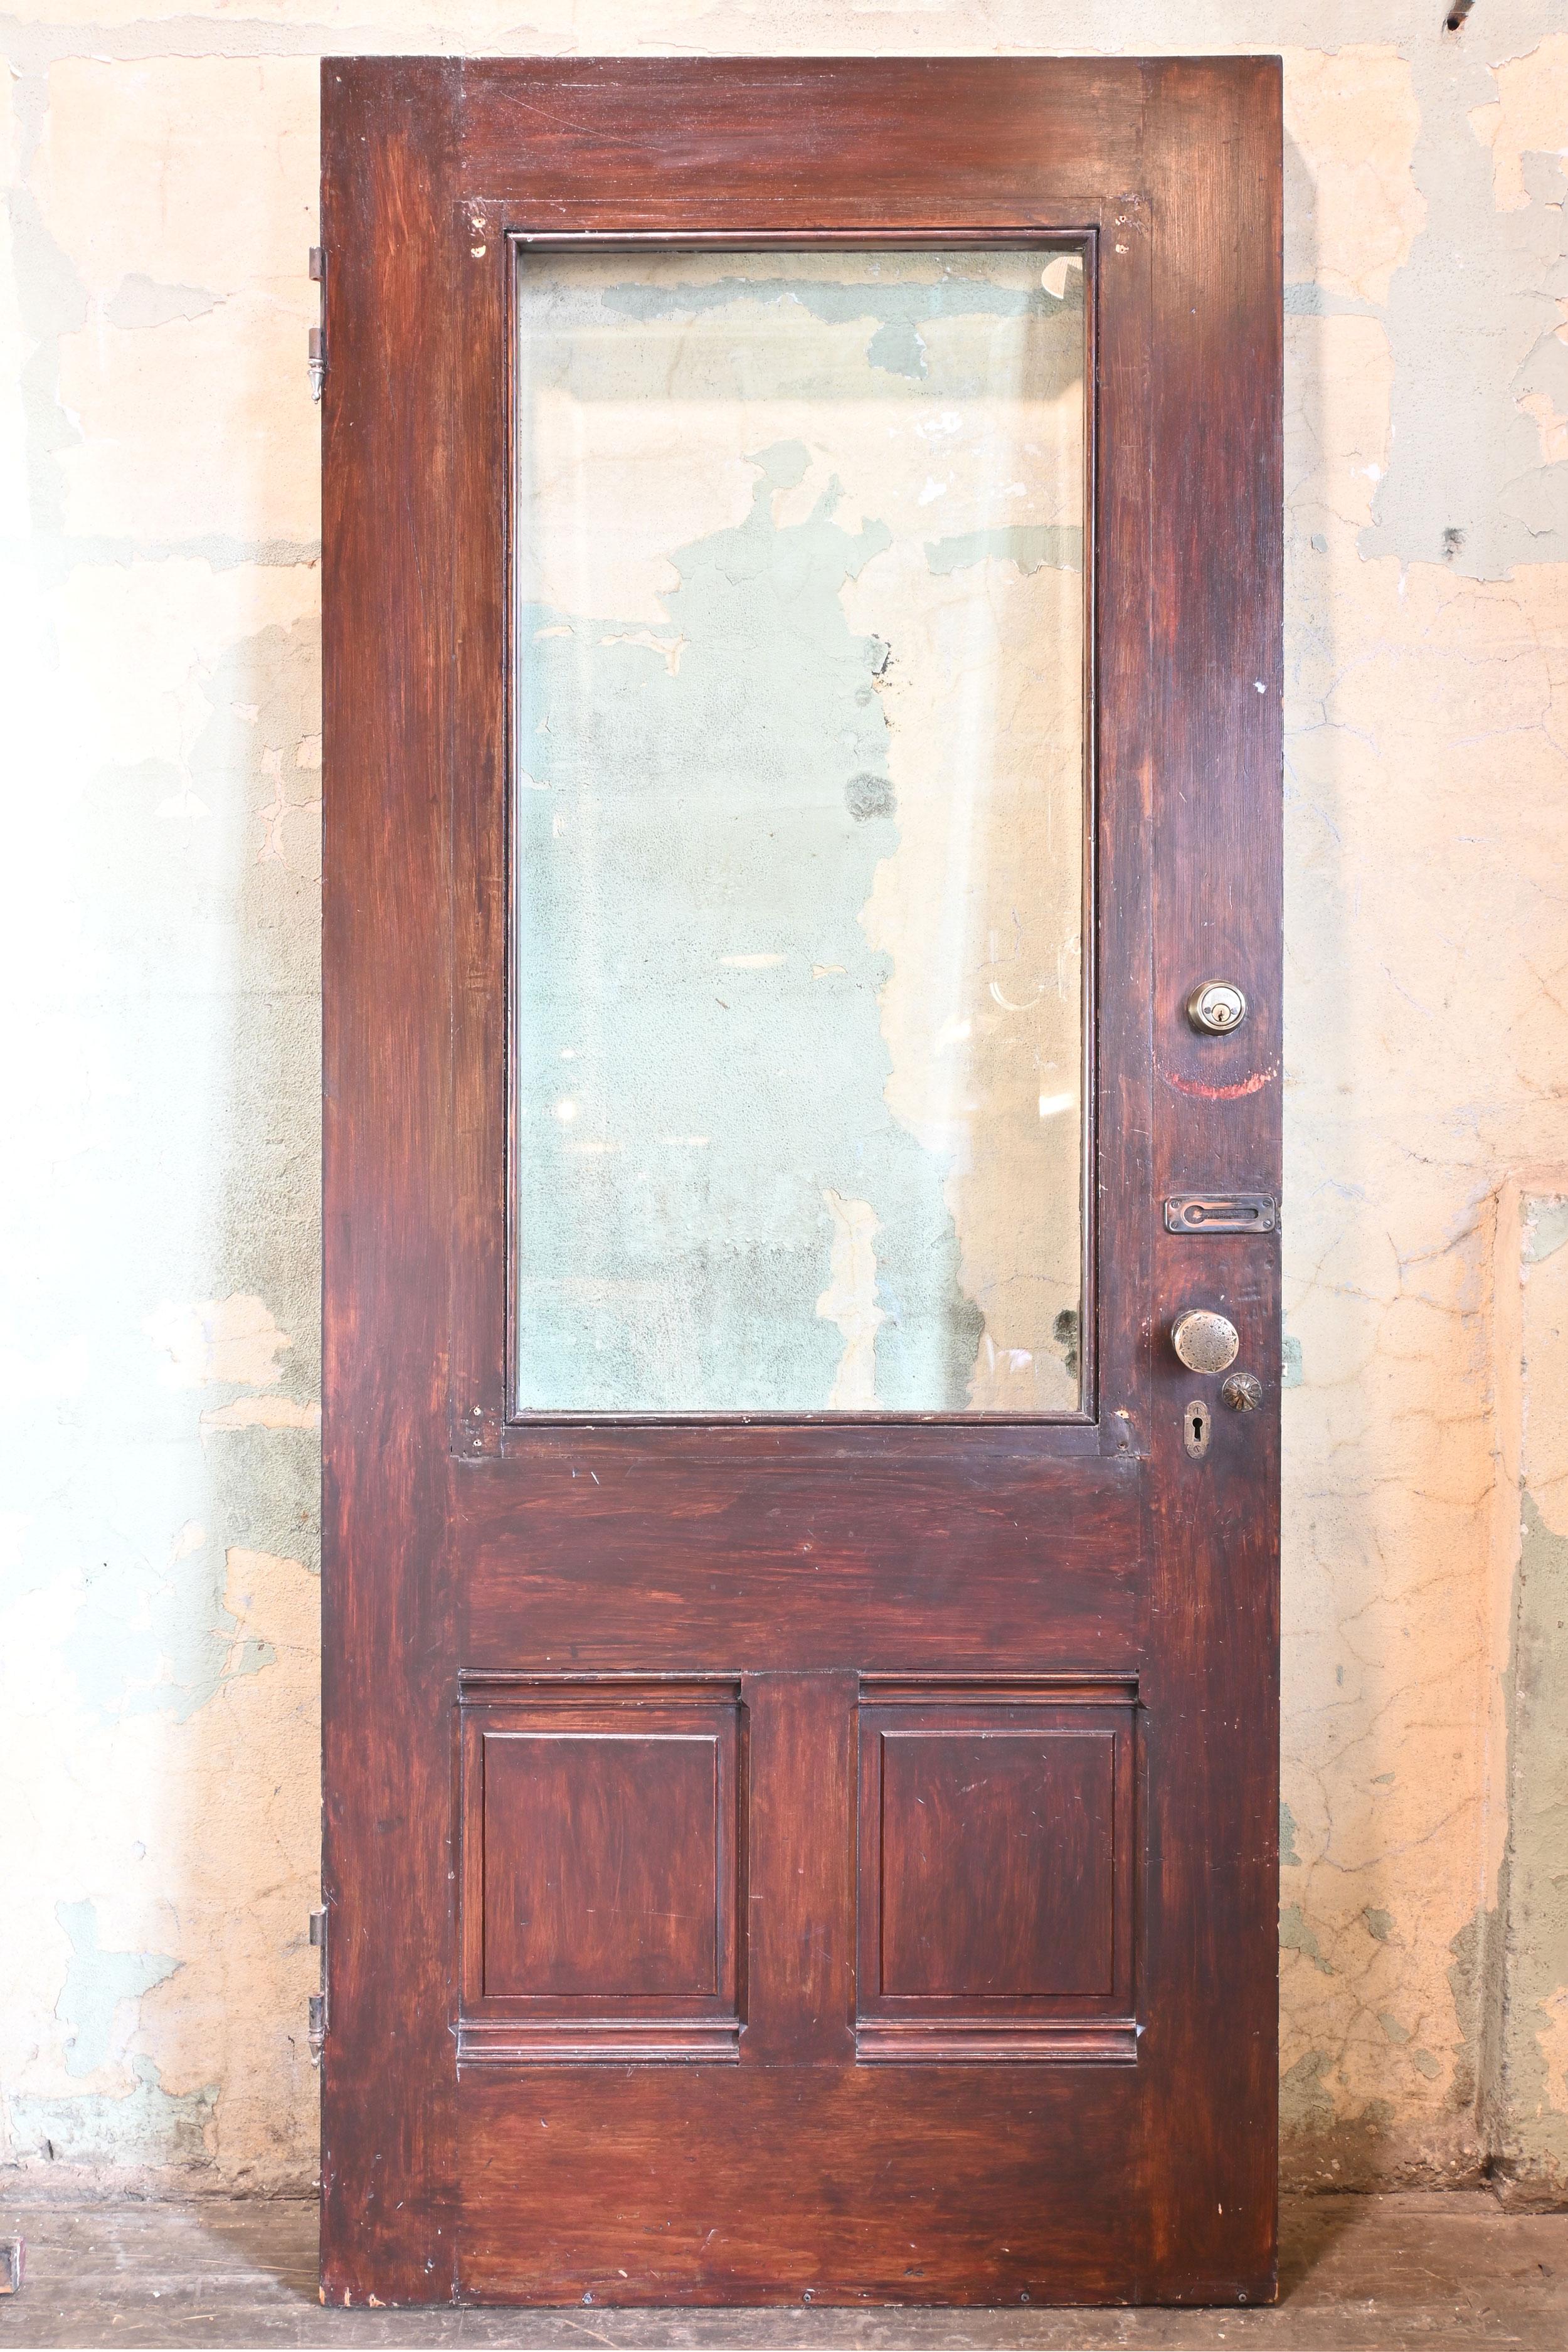 Fir Eastlake Door with Beveled Glass Window and Jamb with Transom